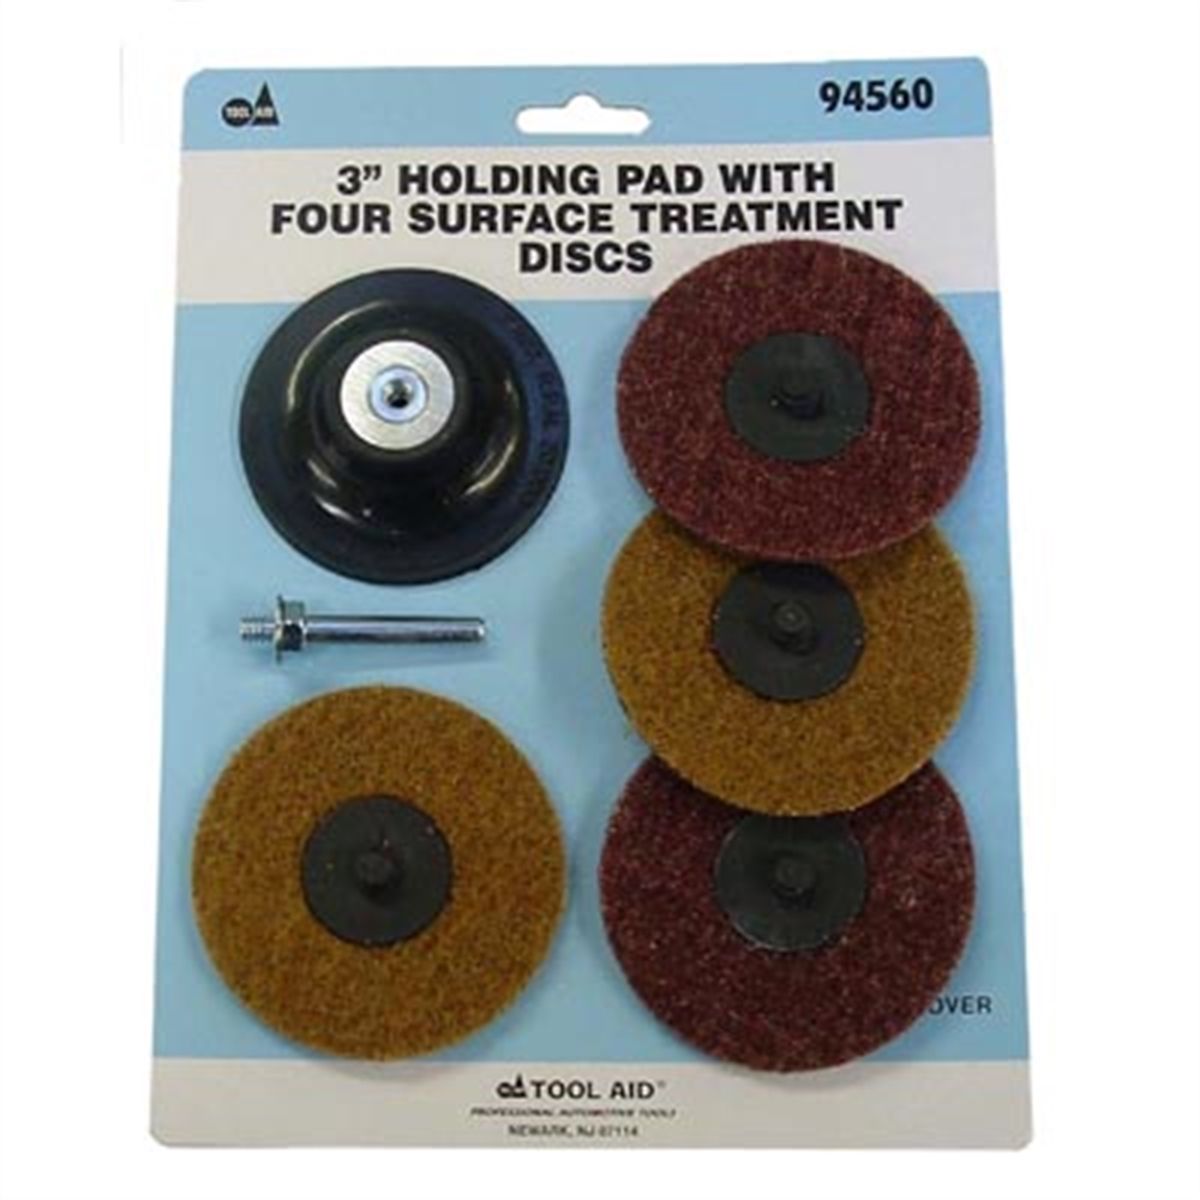 3" Holding Pad with Four Surface Treatment Disc